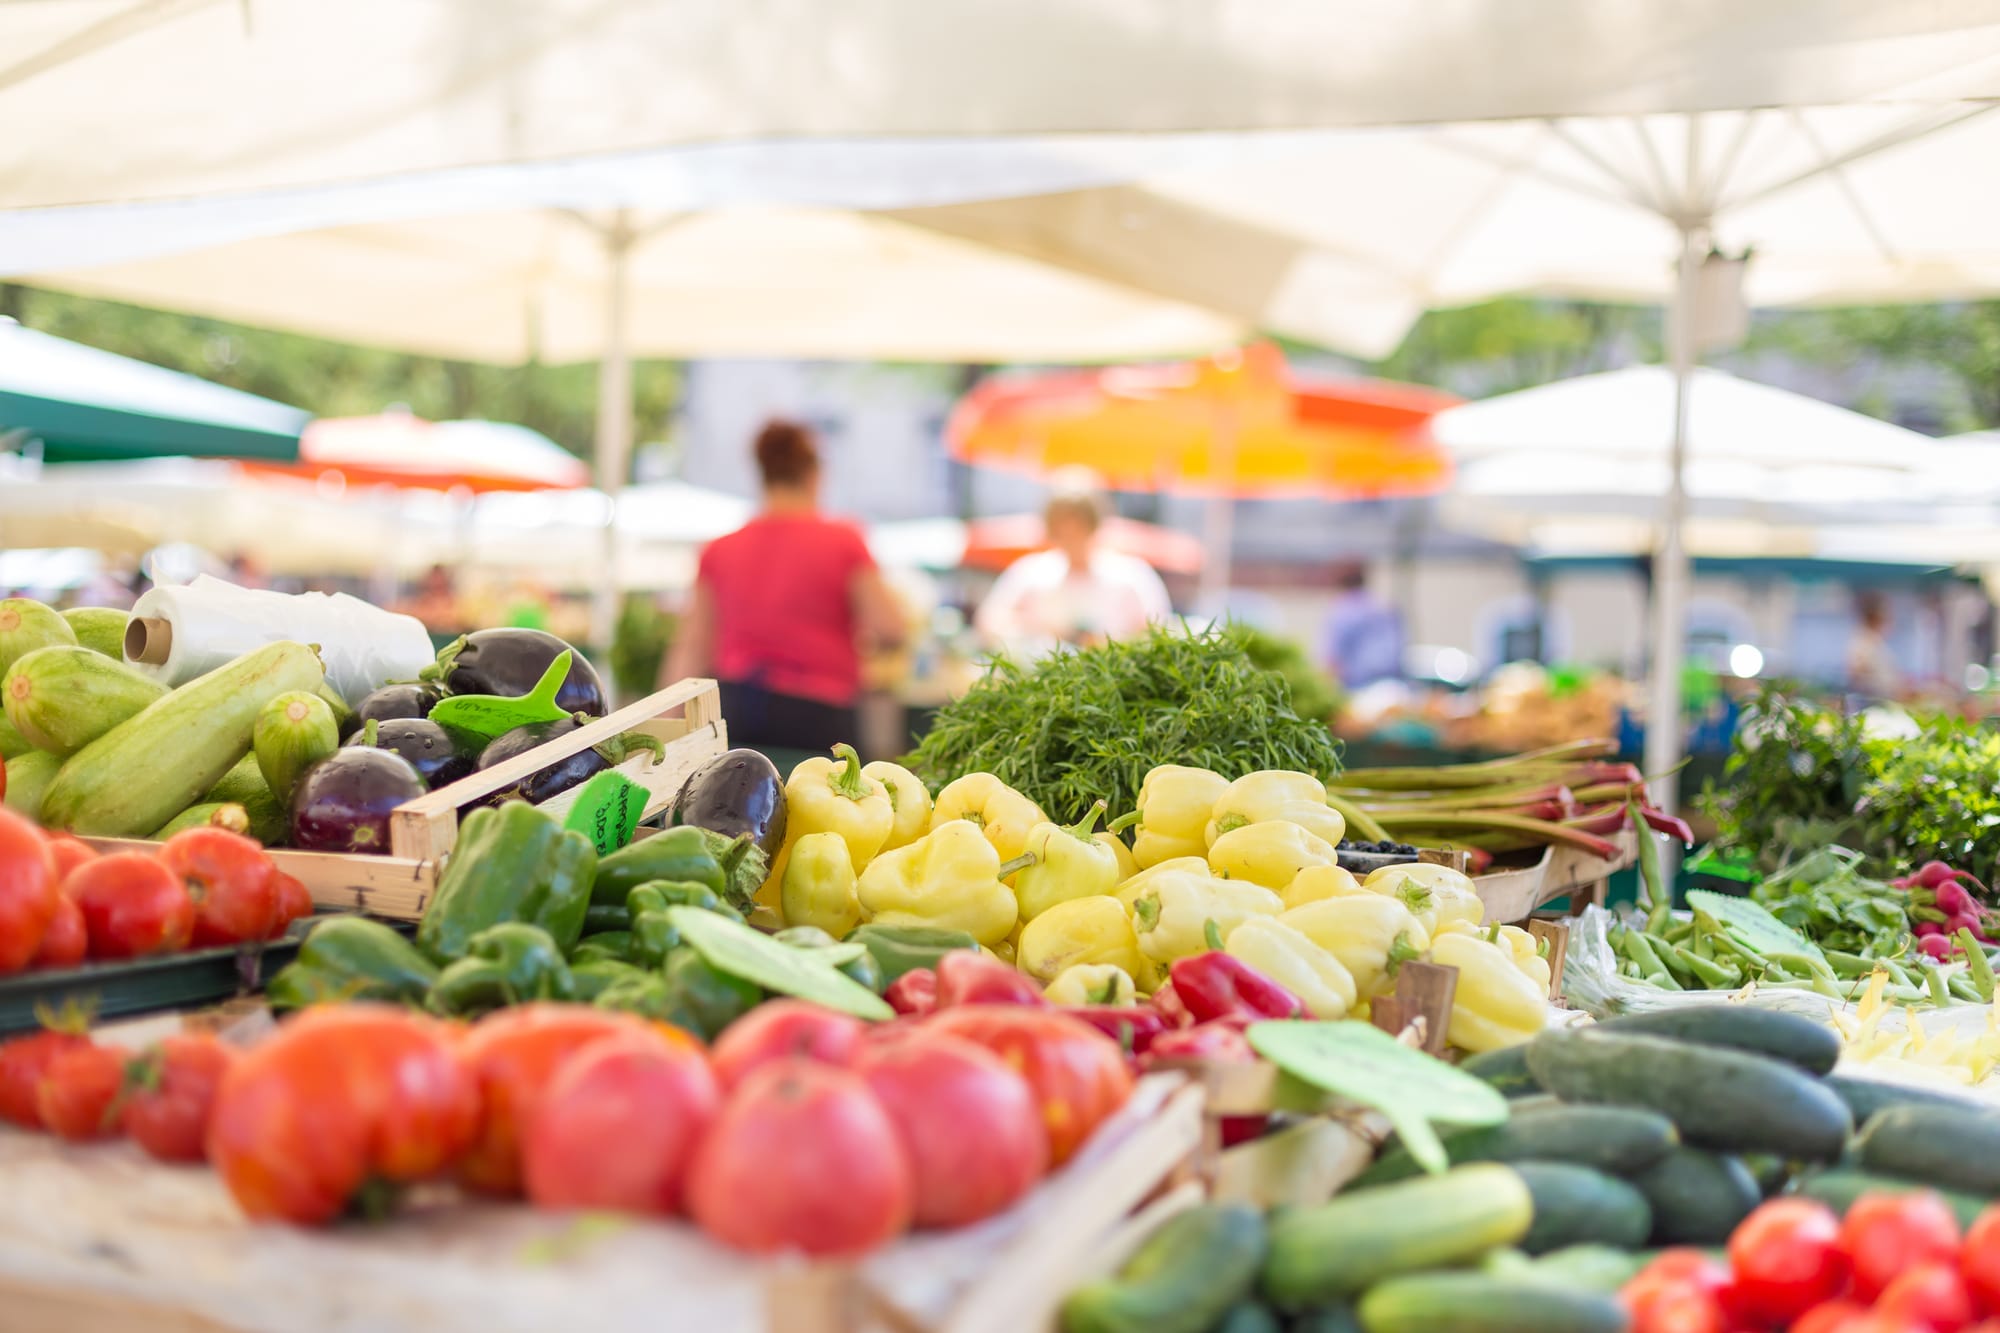 farmer's market, healthy options. Image shows various vegetables.